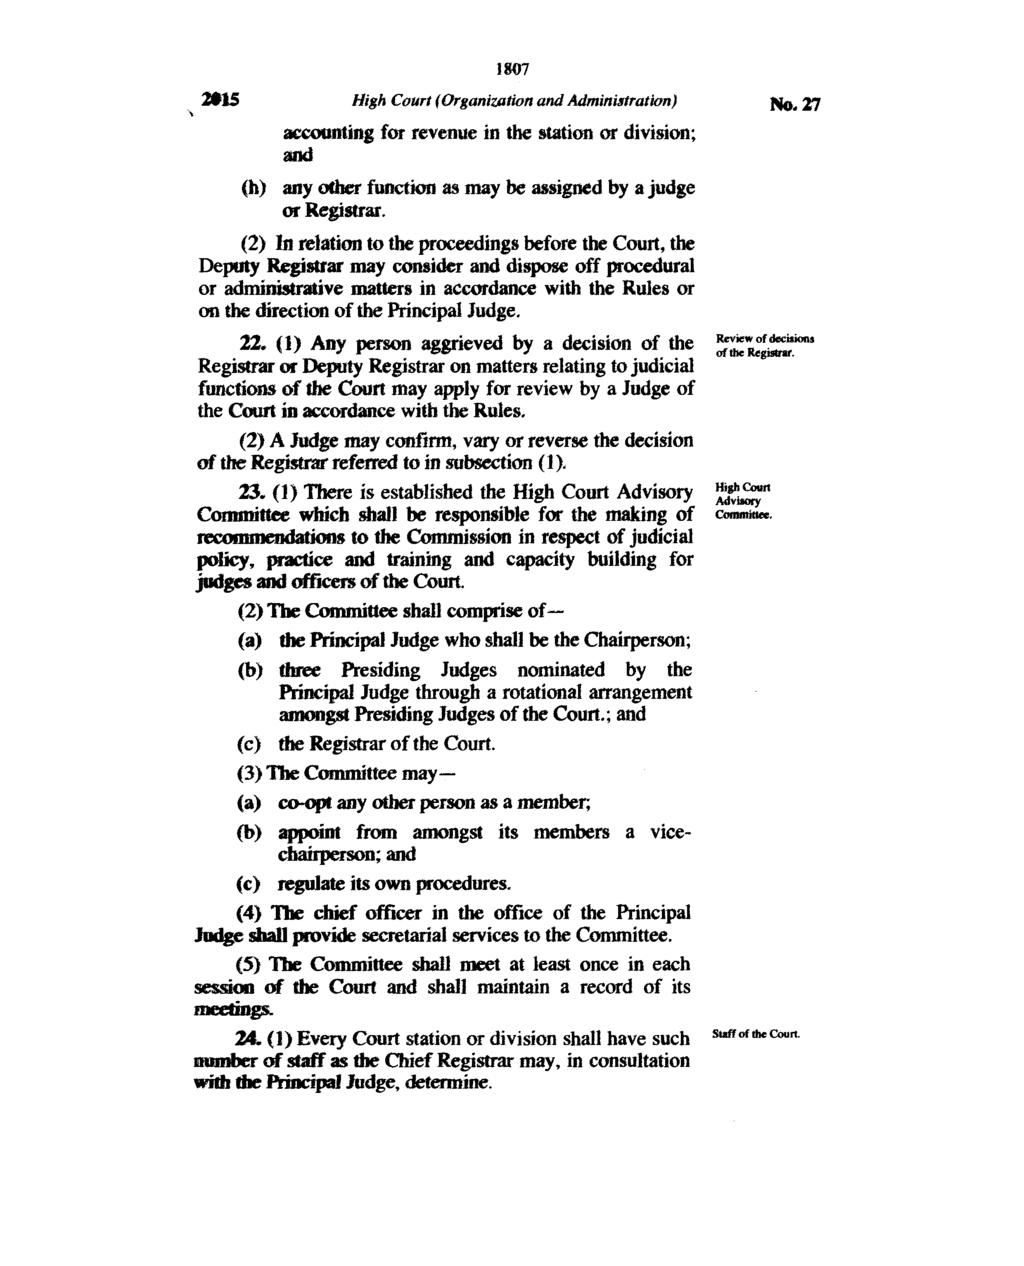 1807 High Court (Organization and Administration) accounting for revenue in the station or division; and (h) any other function as may be assigned by a judge or Registrar.